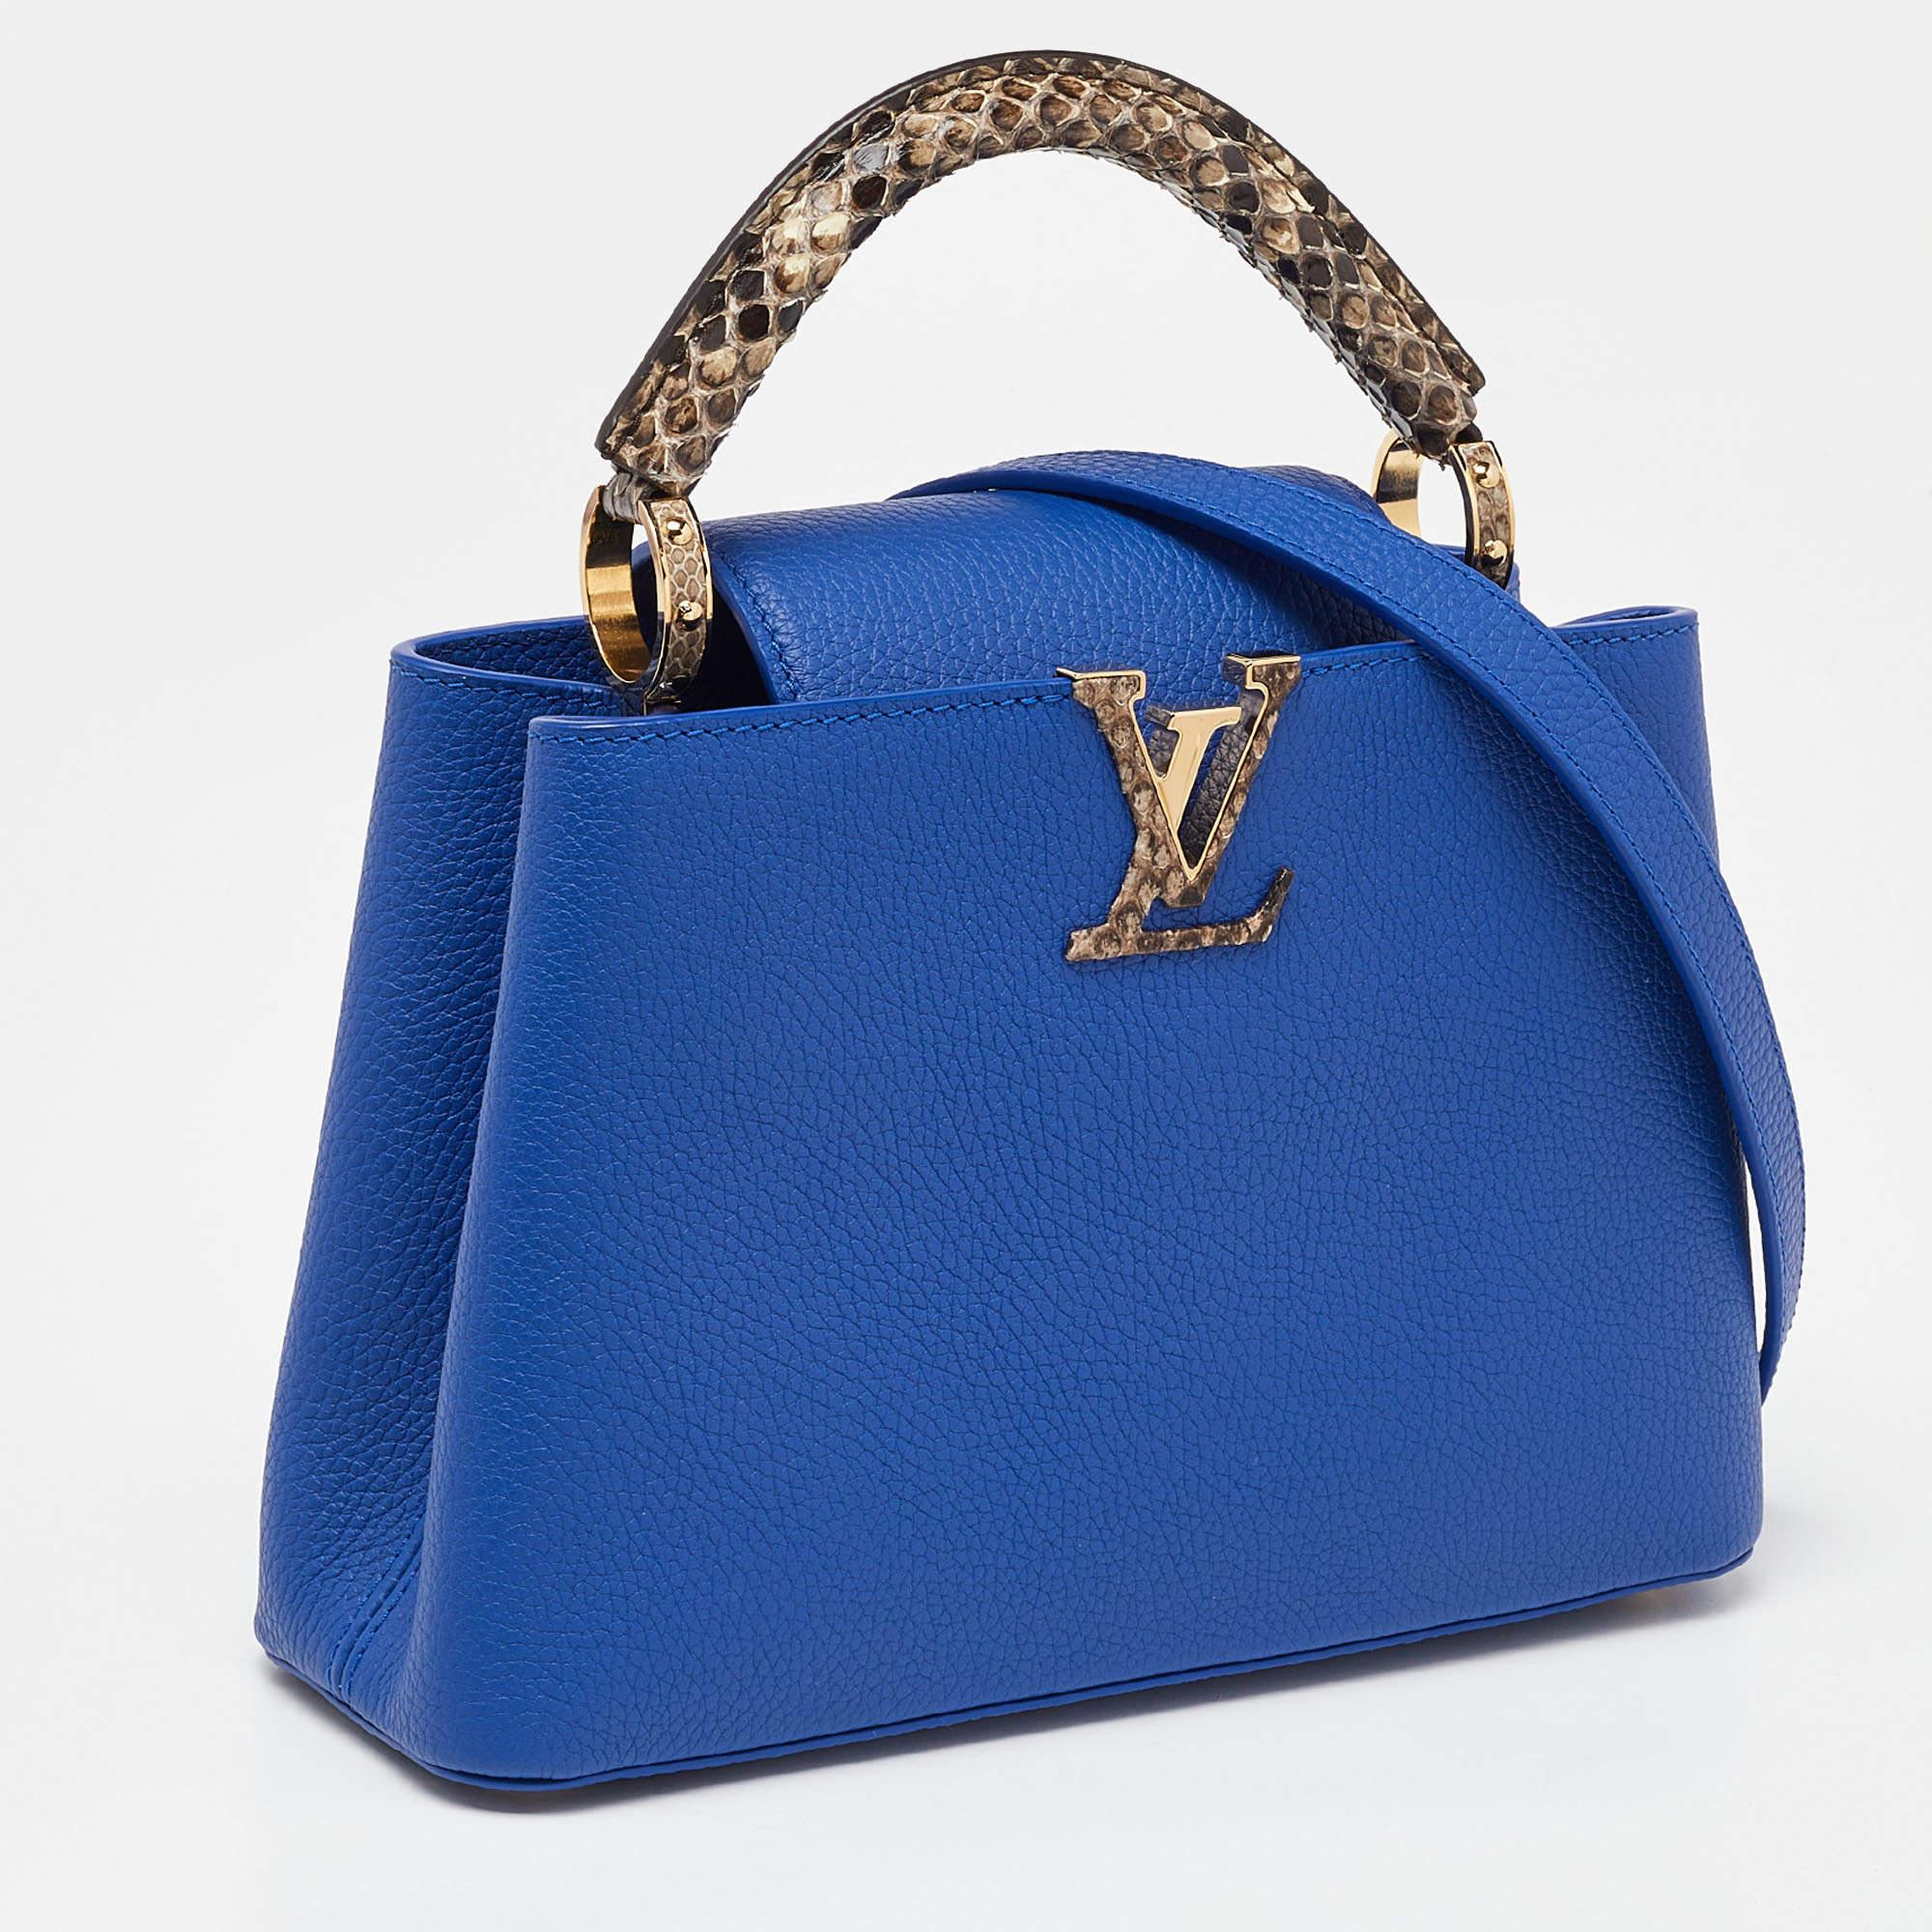 Louis Vuitton's creations are popular owing to their high style and functionality. This Capucines bag, like all the other handbags, is durable and stylish. Exuding a fine finish, the bag is designed to give a luxurious experience. The interior has